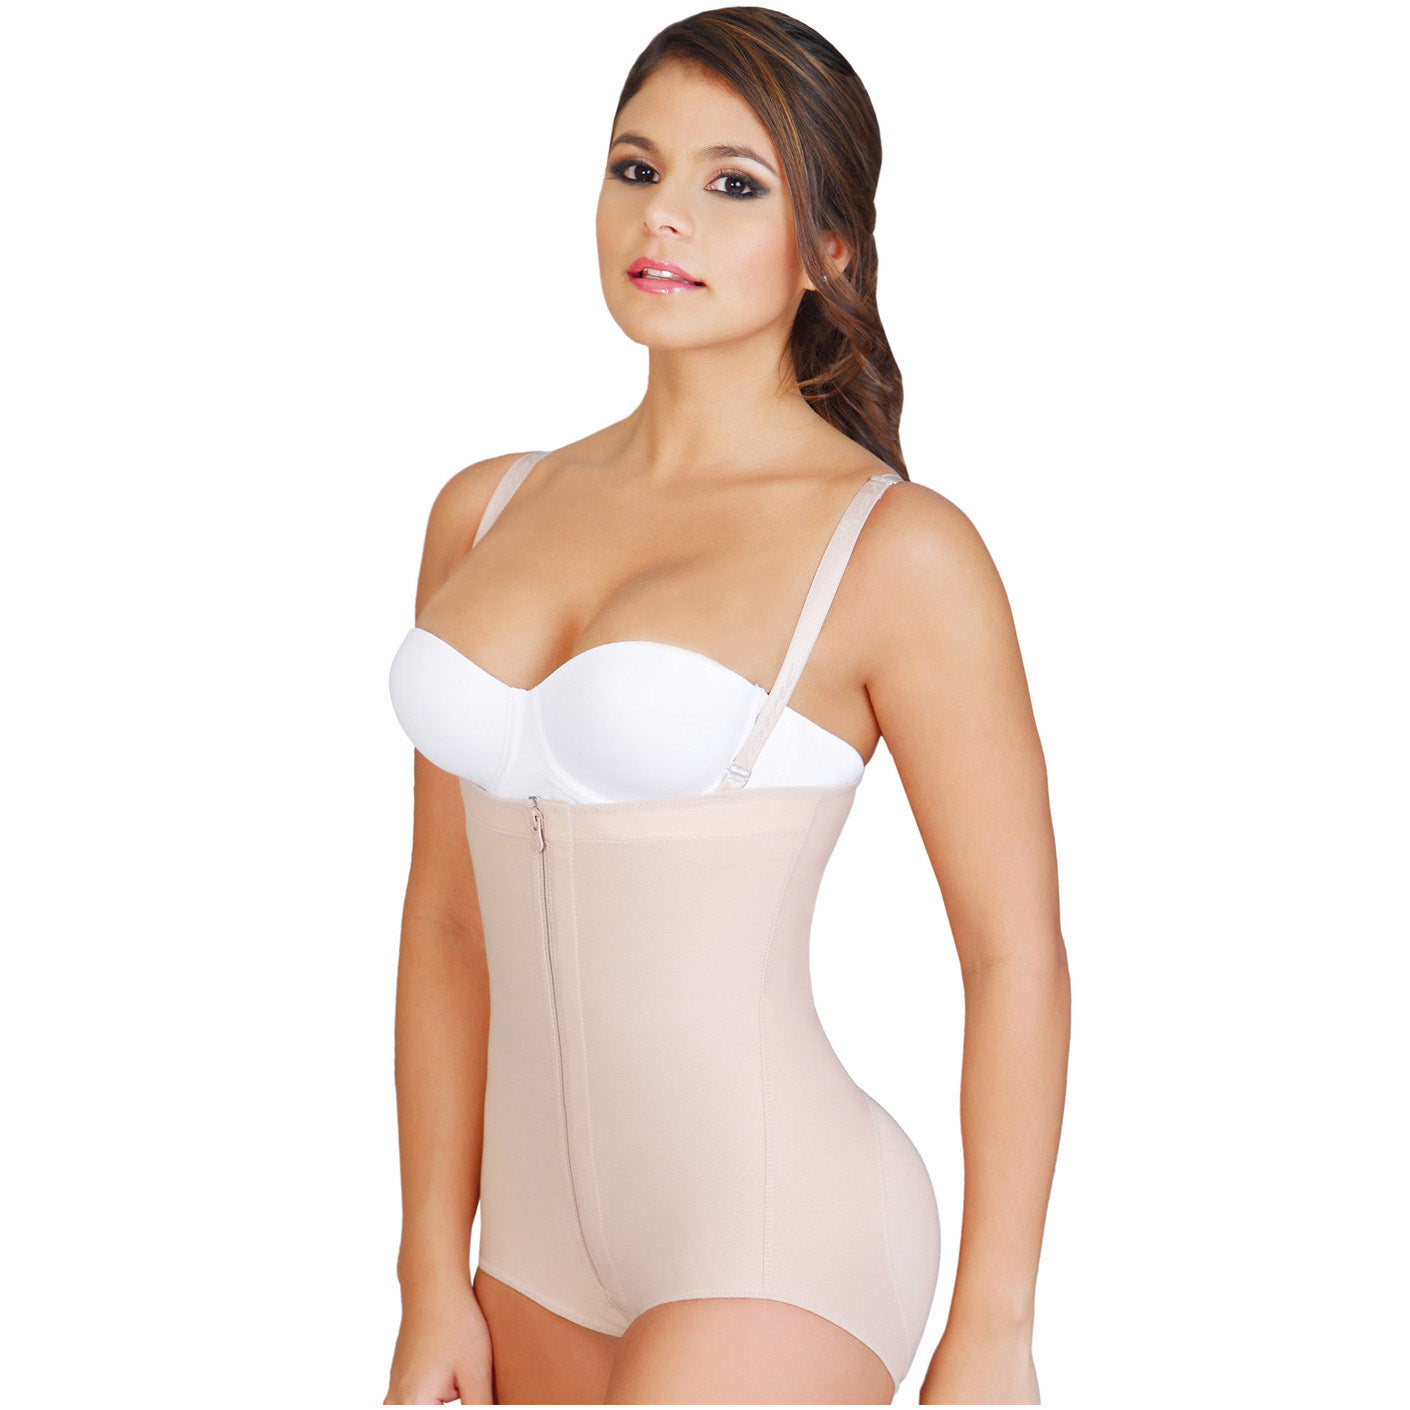 Salome A-0319 Fajas Colombianas Reductoras Womens Body Shaper Butt